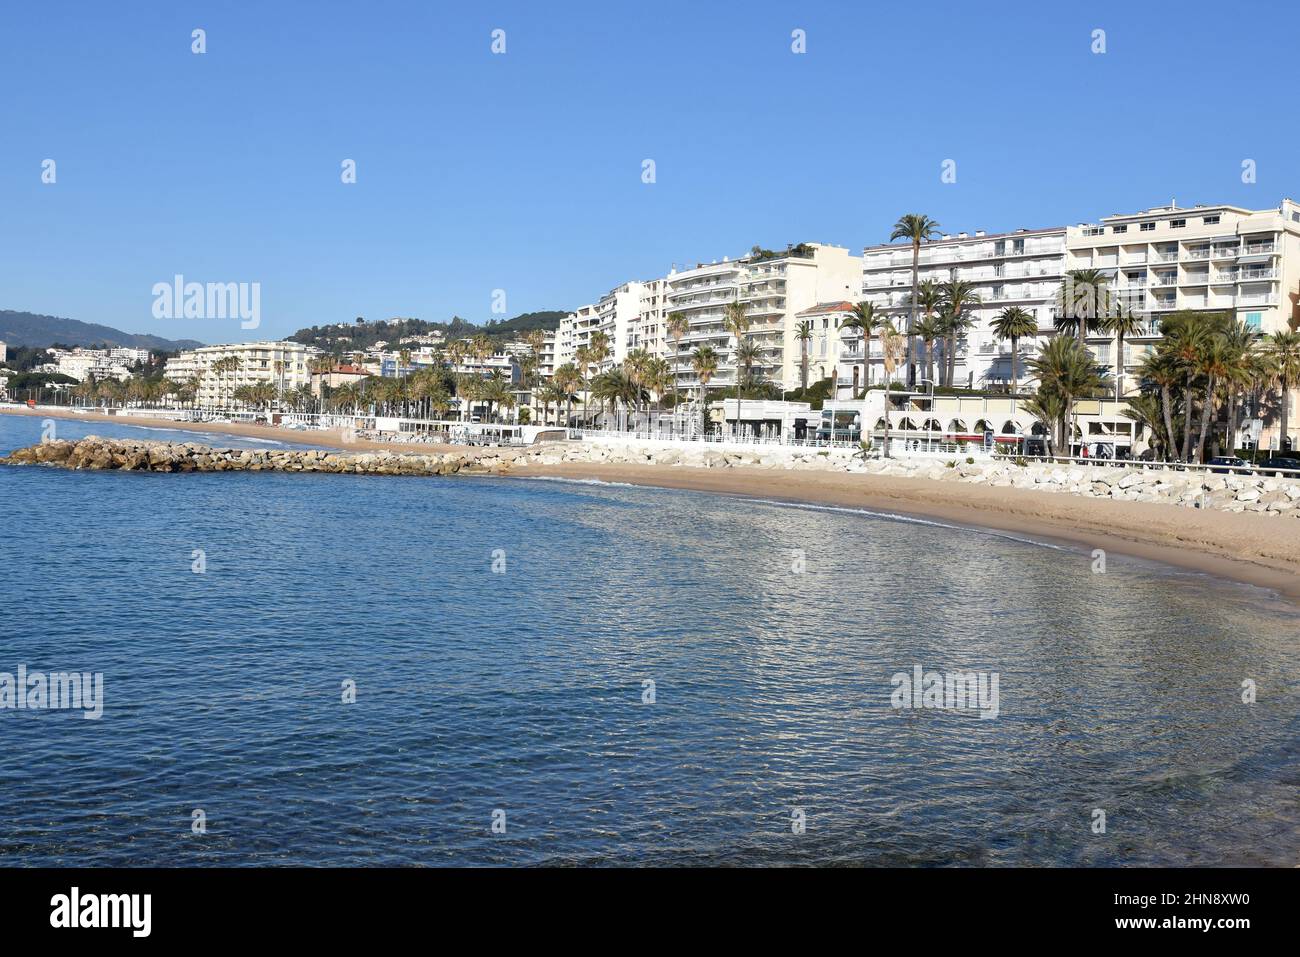 France, french riviera, Cannes, the seaside on Boulevard du Midi with its palm trees and sandy beaches. Stock Photo